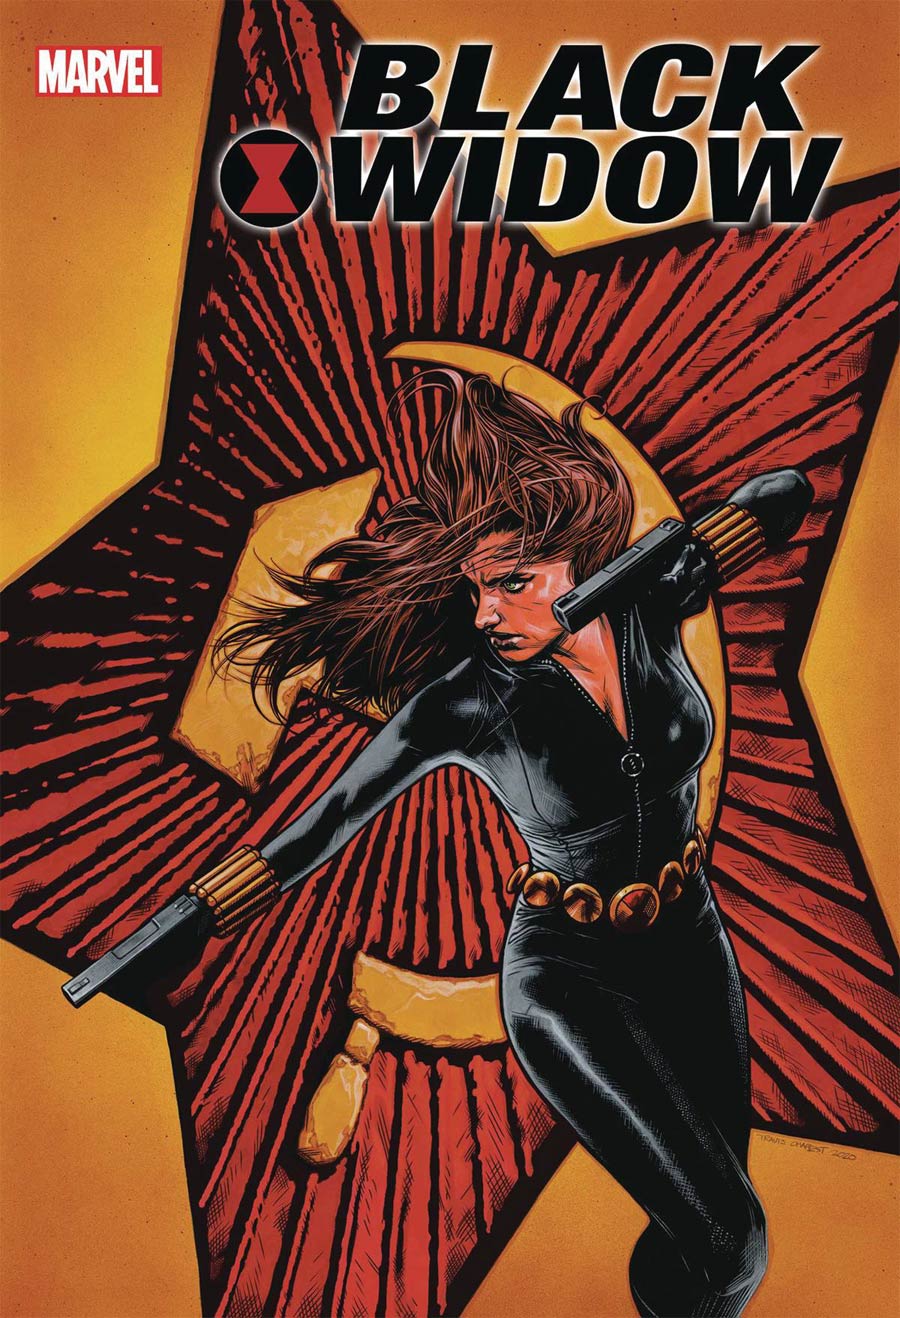 Black Widow Vol 8 #1 Cover C Variant Travis Charest Cover